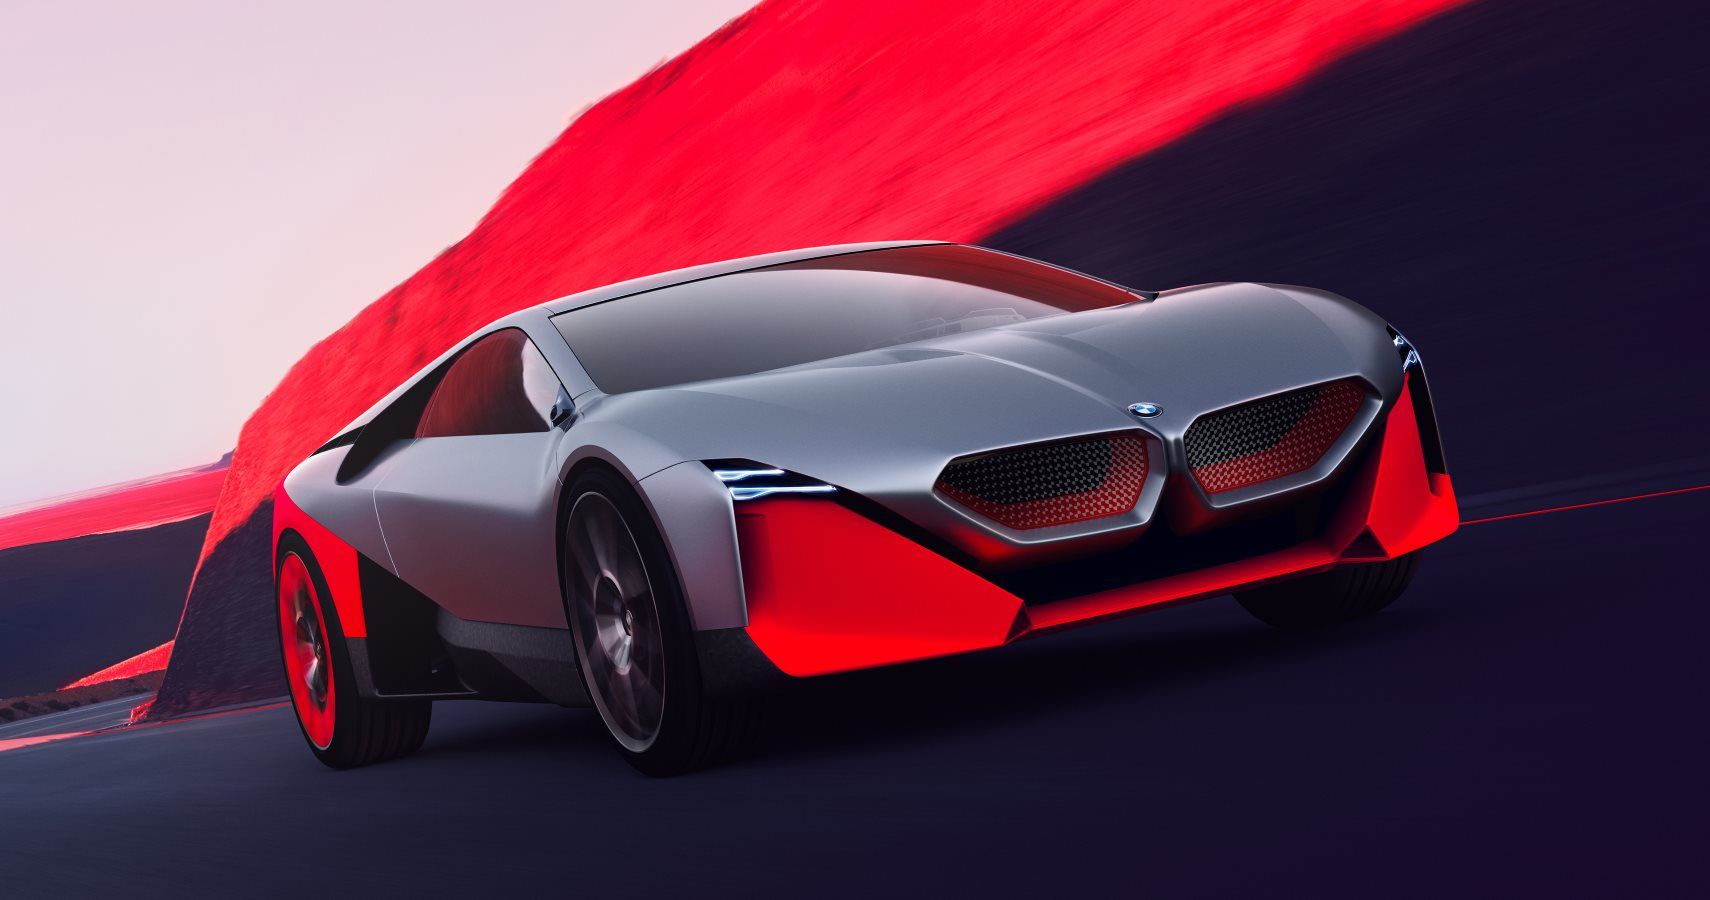 BMW Reveals Vision M Next Hybrid Concept With 600 HP